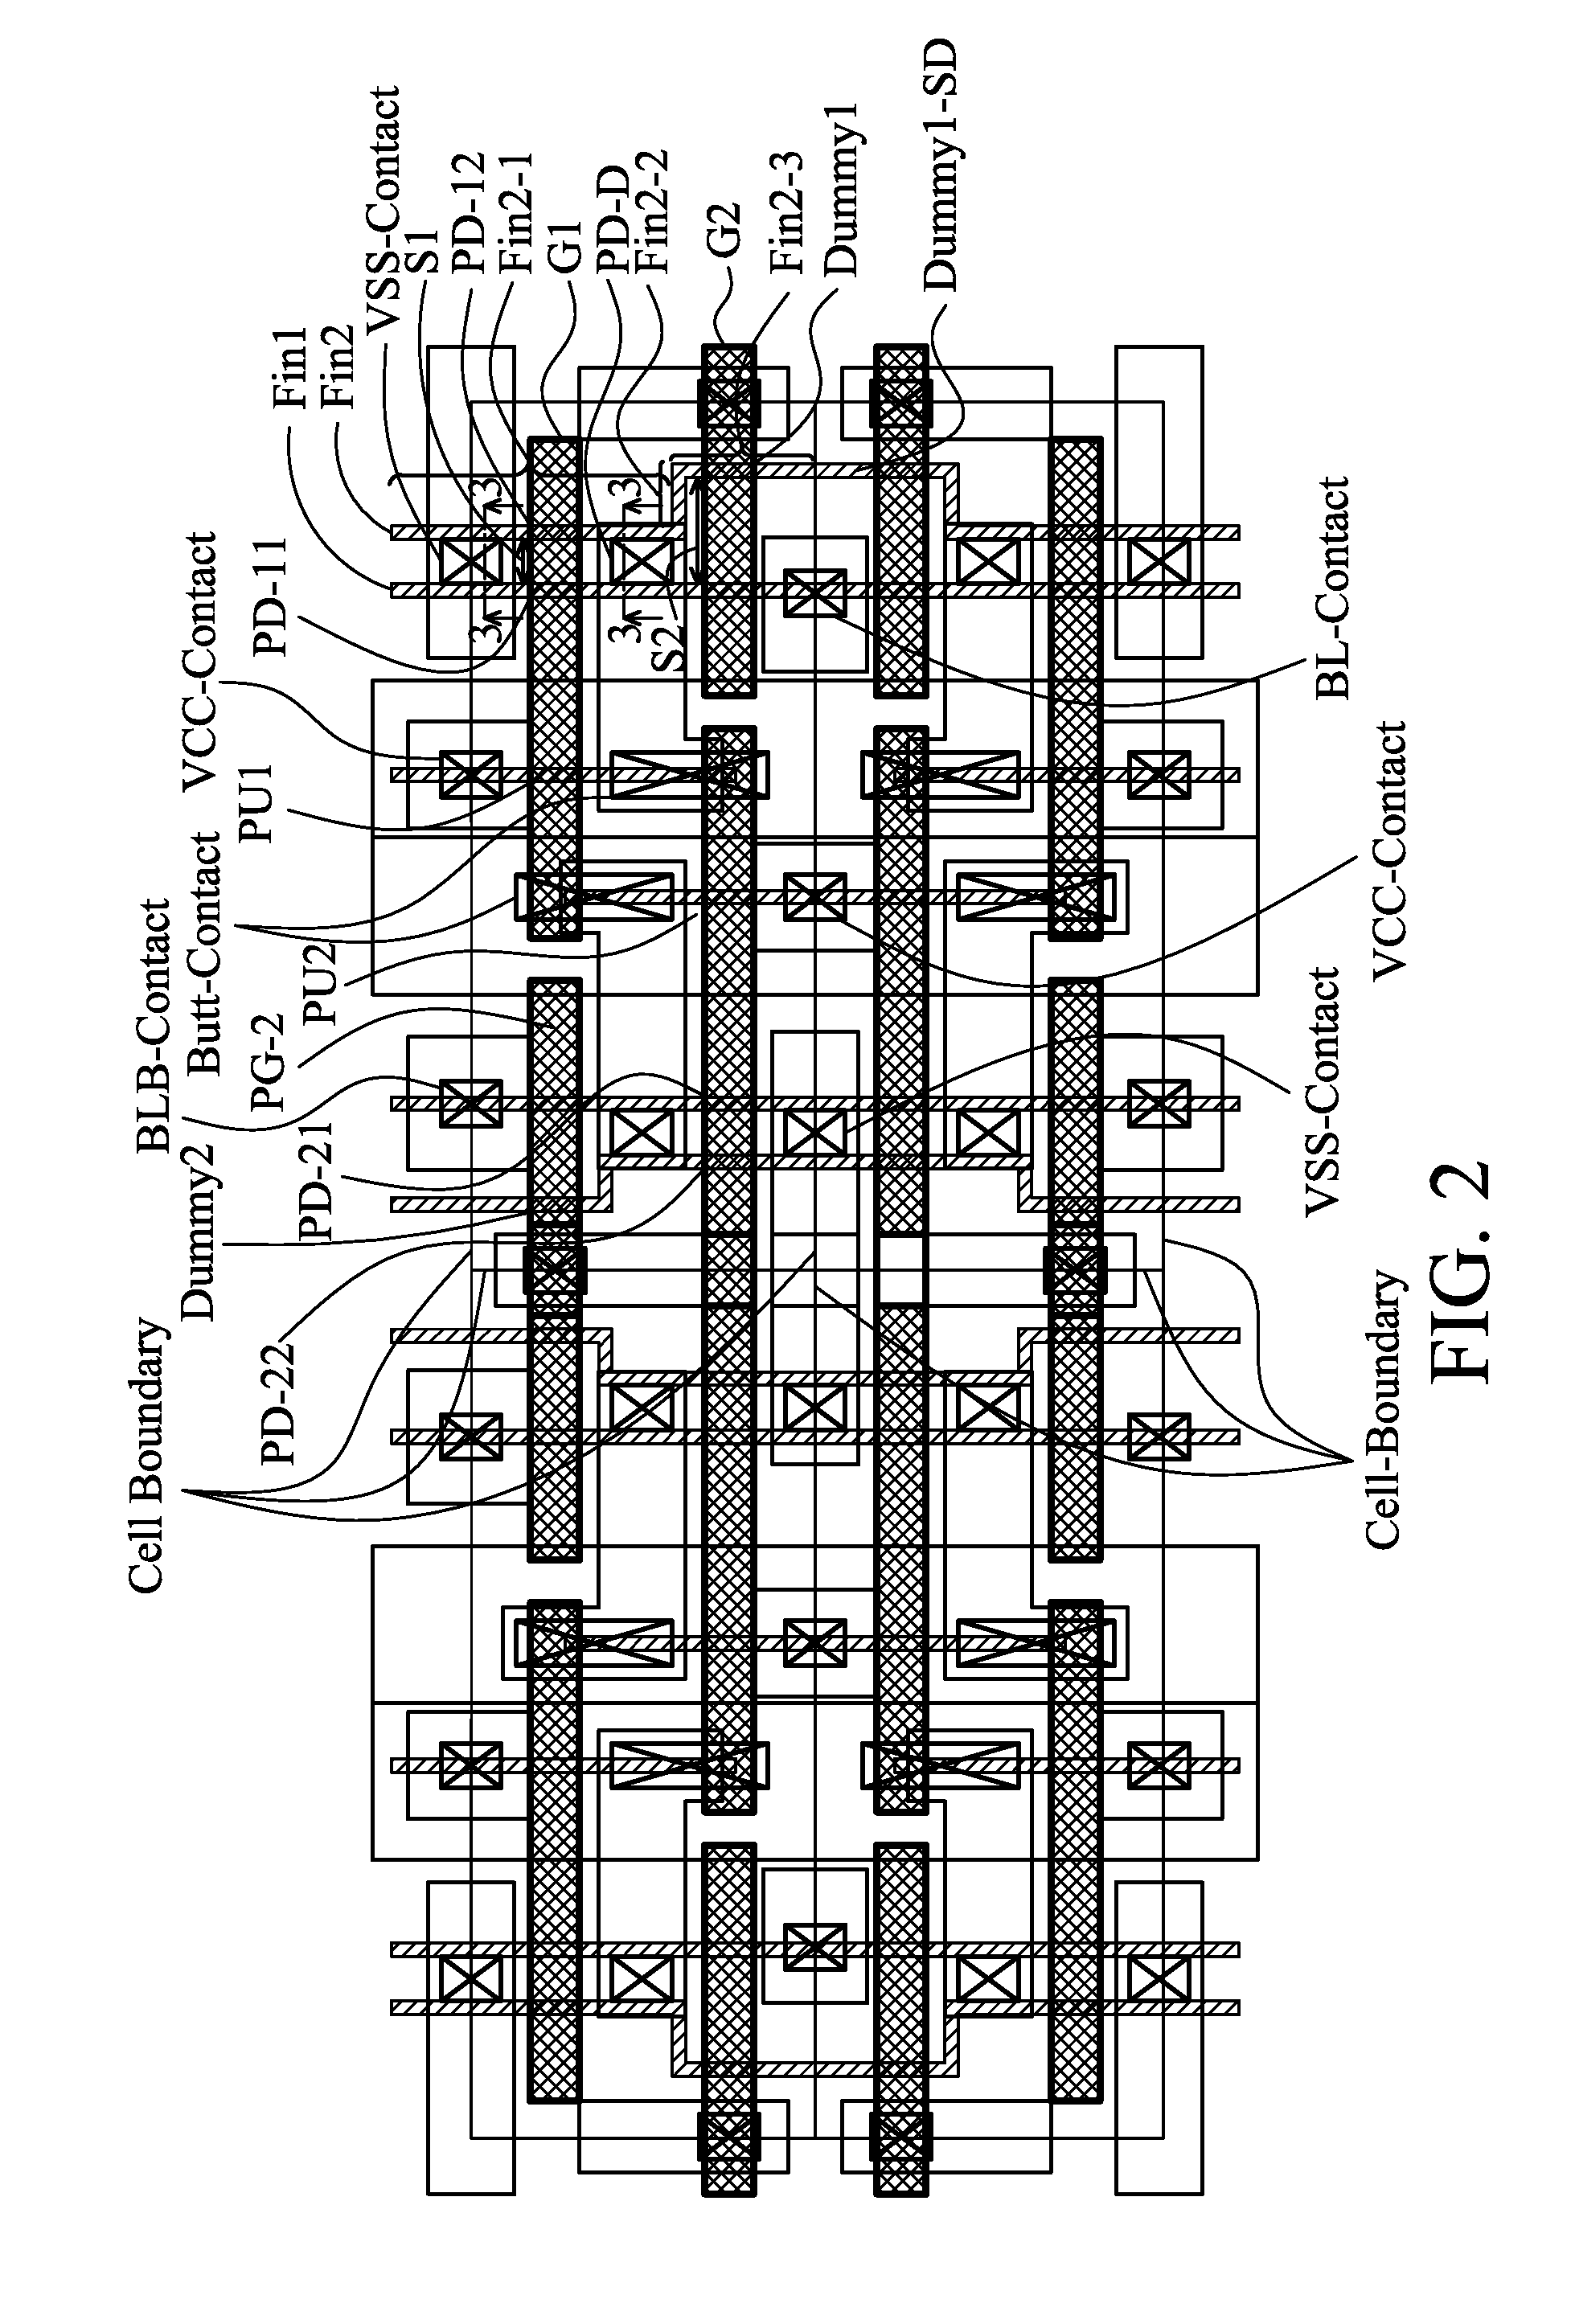 SRAM Structure with FinFETs Having Multiple Fins